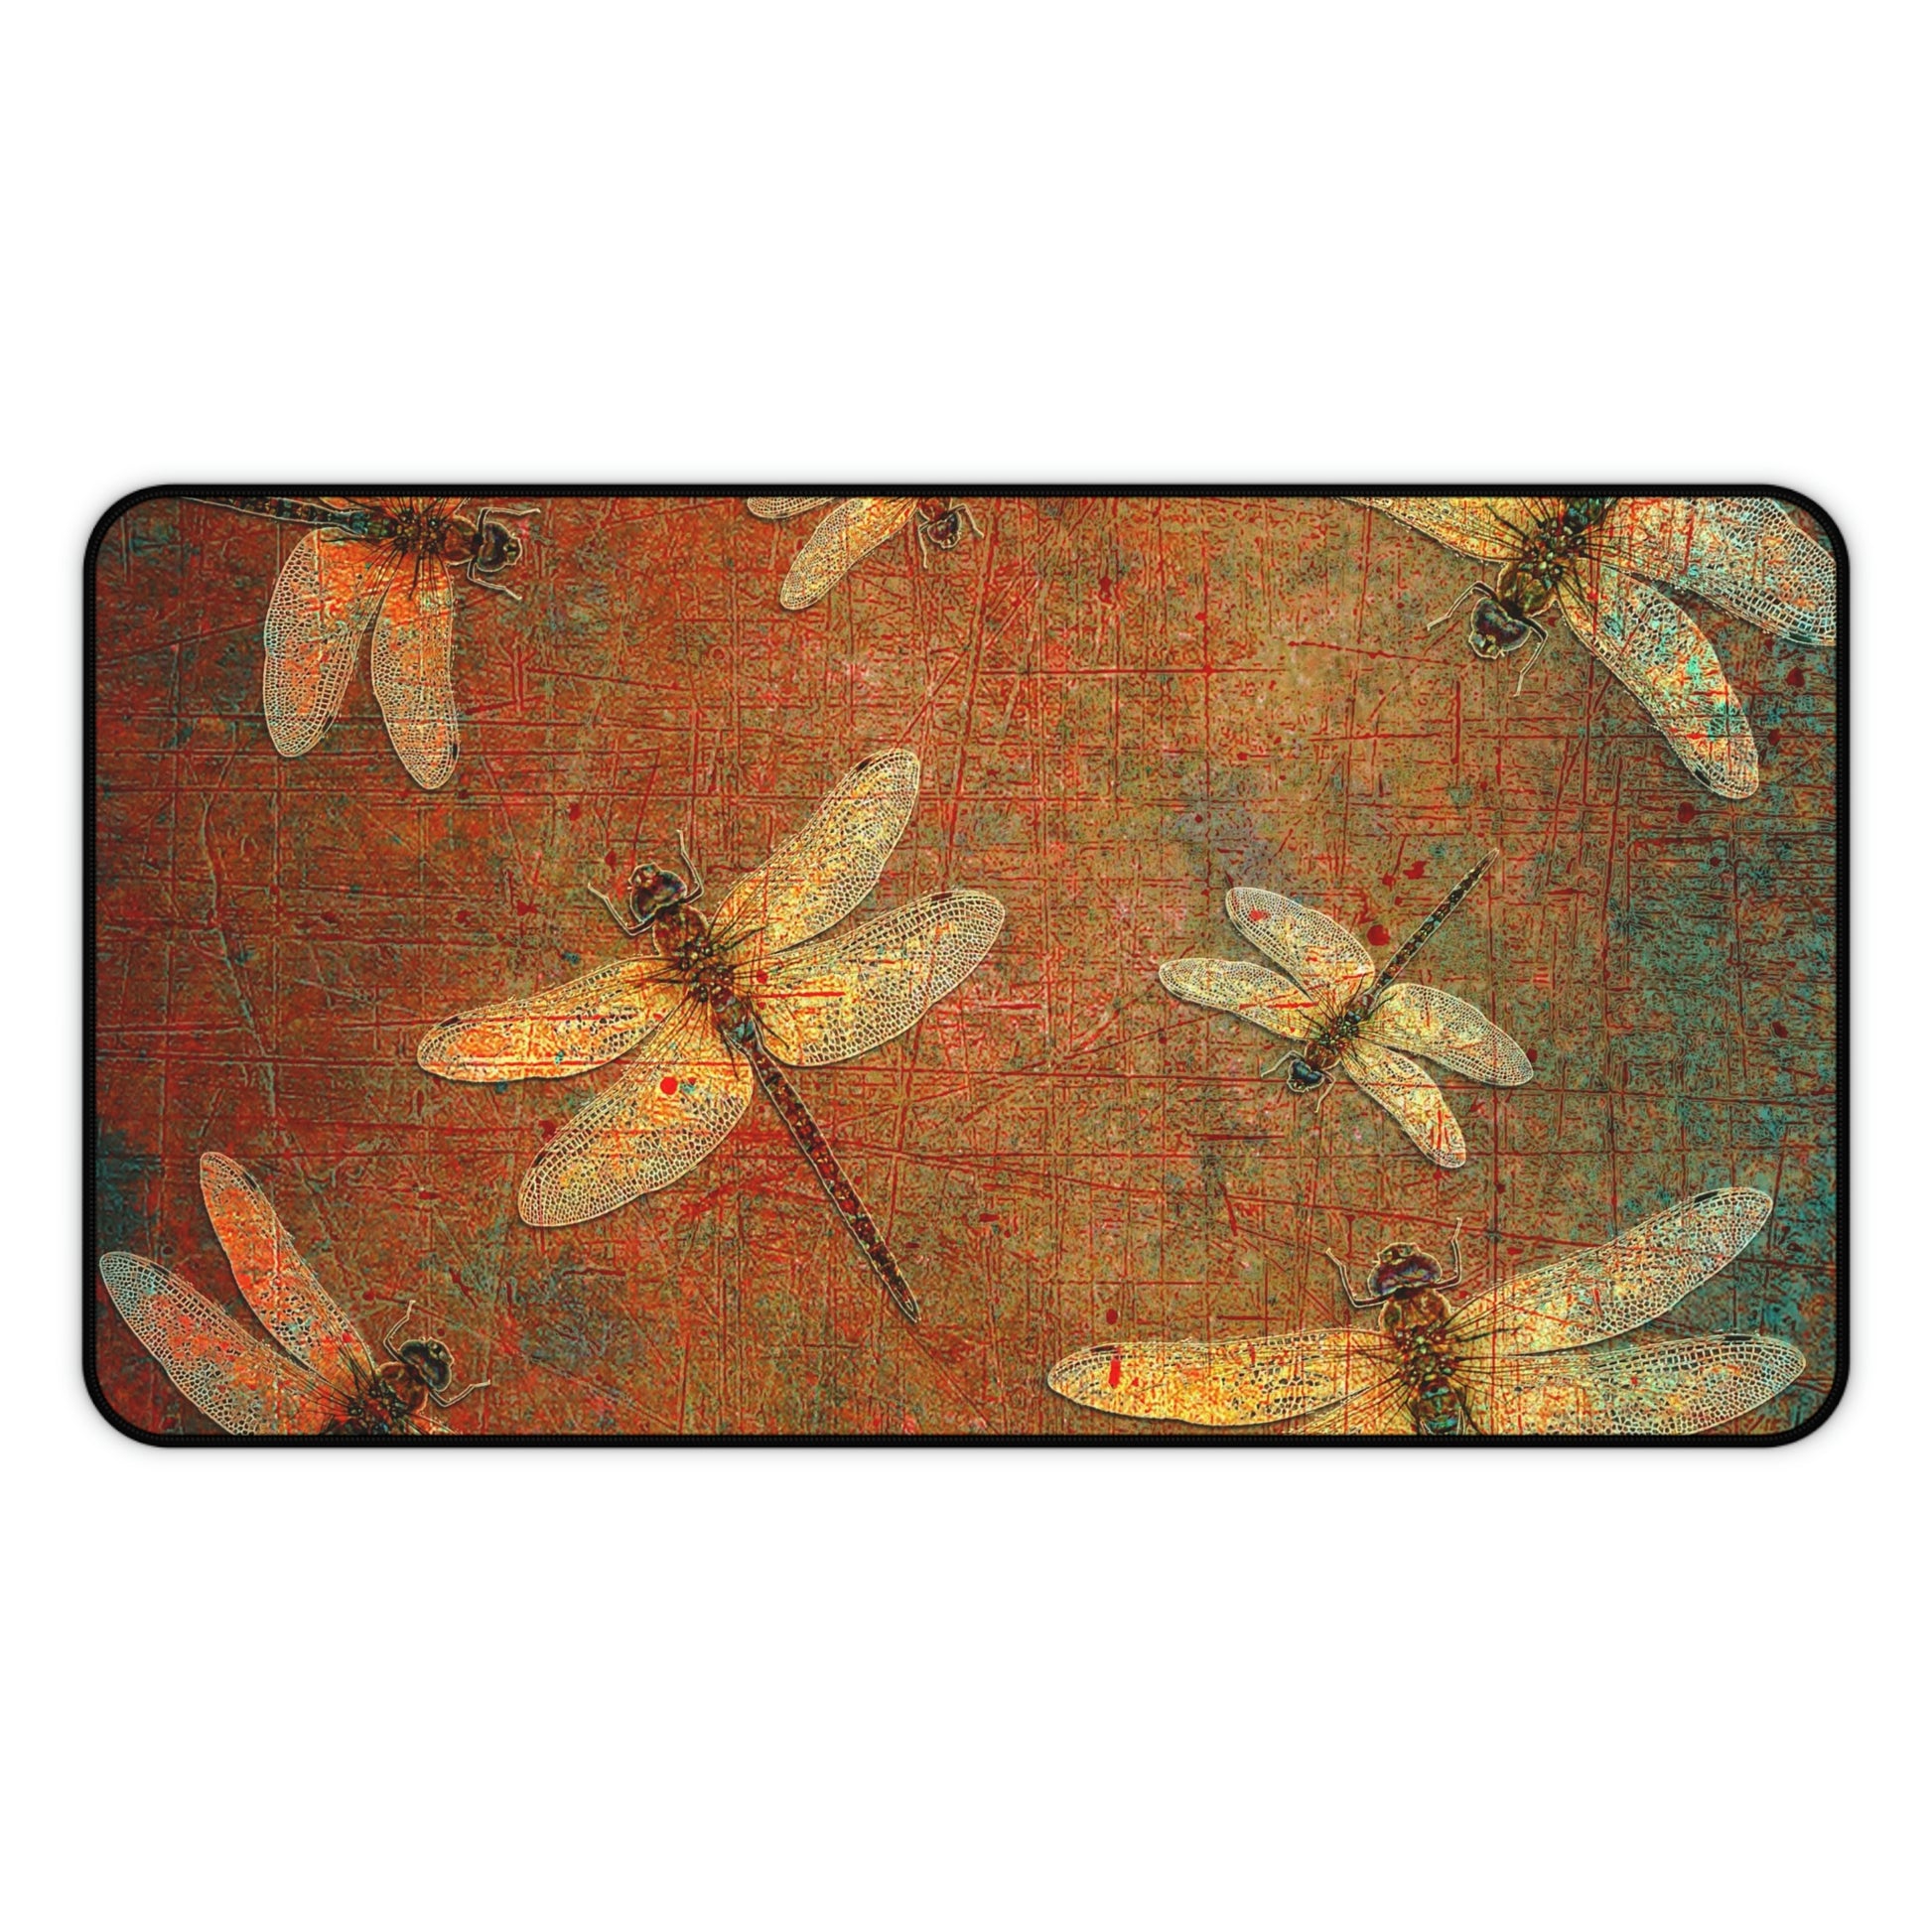 Dragonfly Desk Mat - Flight of Dragonflies on Brown and Orange Background 12x22